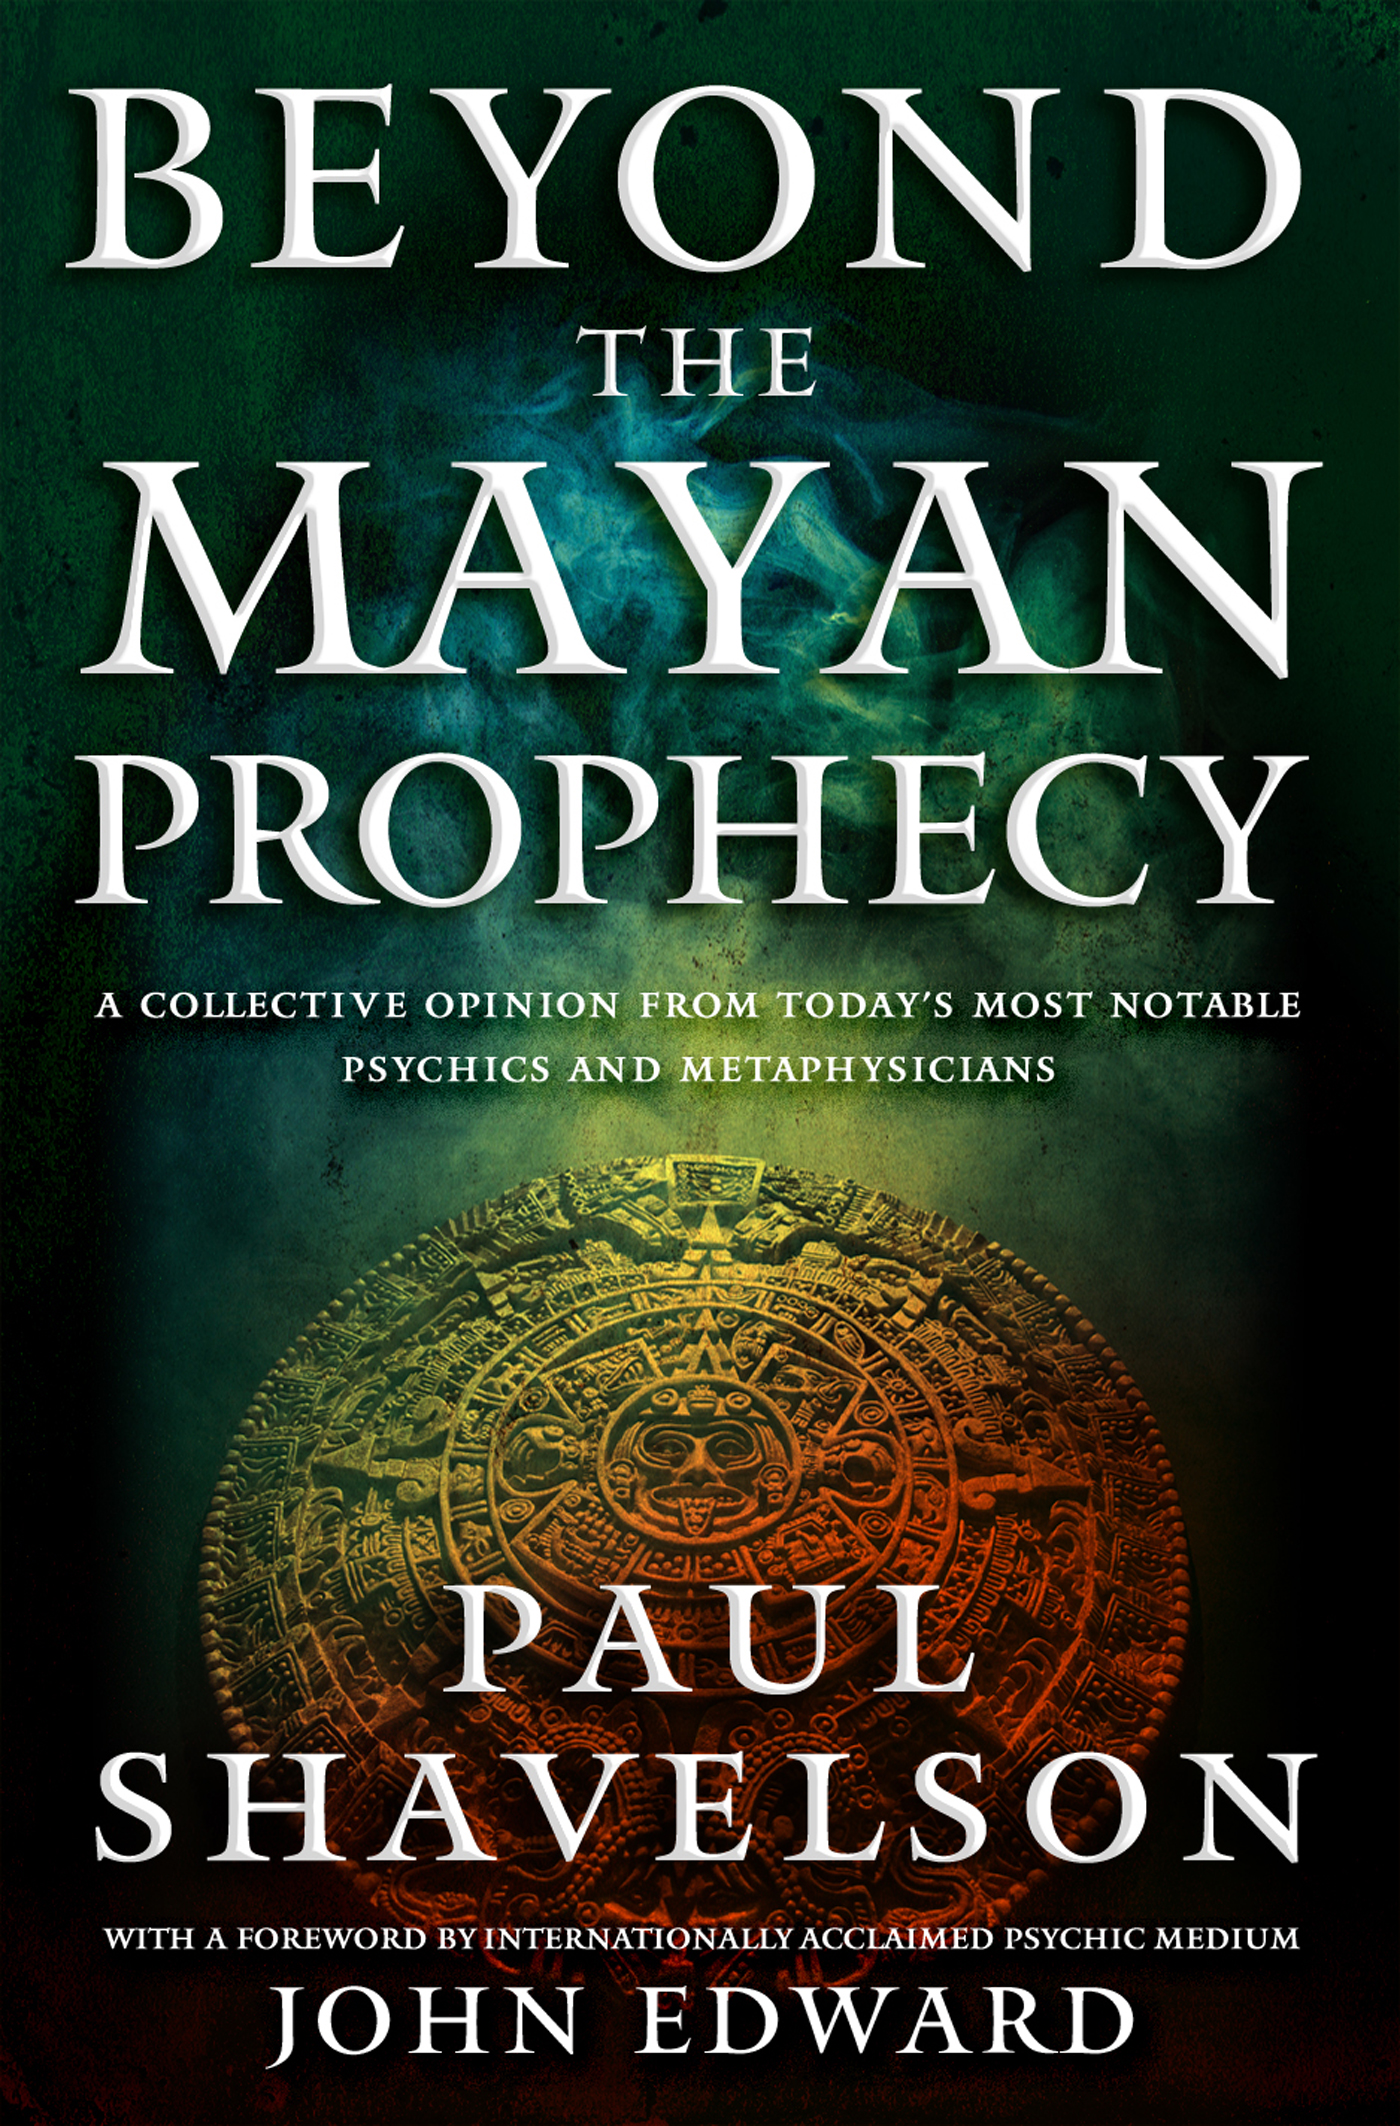 Beyond the Mayan Prophecy : A Collective Opinion from Today's Most Notable Psychics and Metaphysicians by Paul Shavelson, John Edward